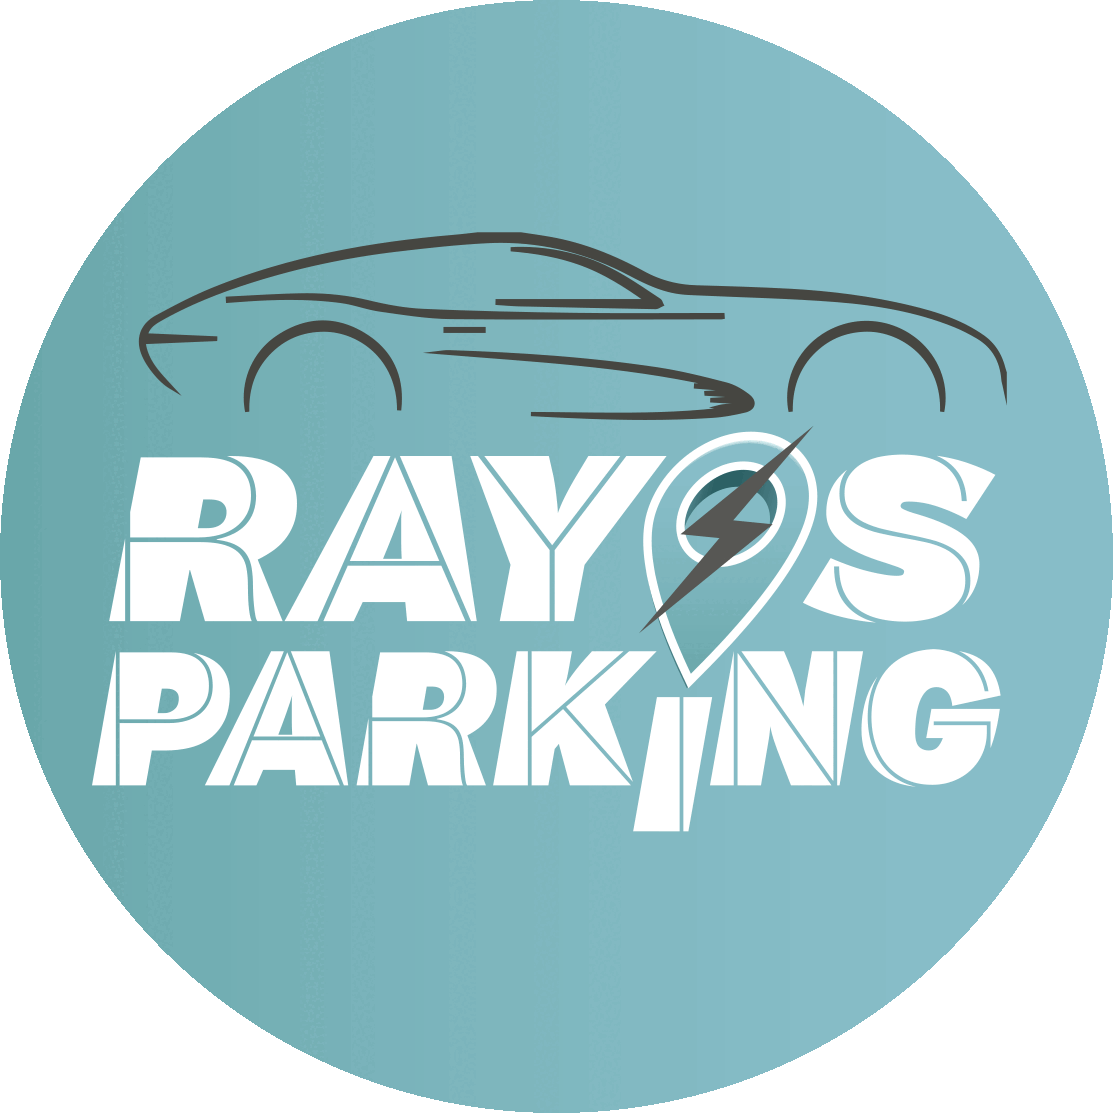 Rayos Parking - Cubierto At Madrid Airport